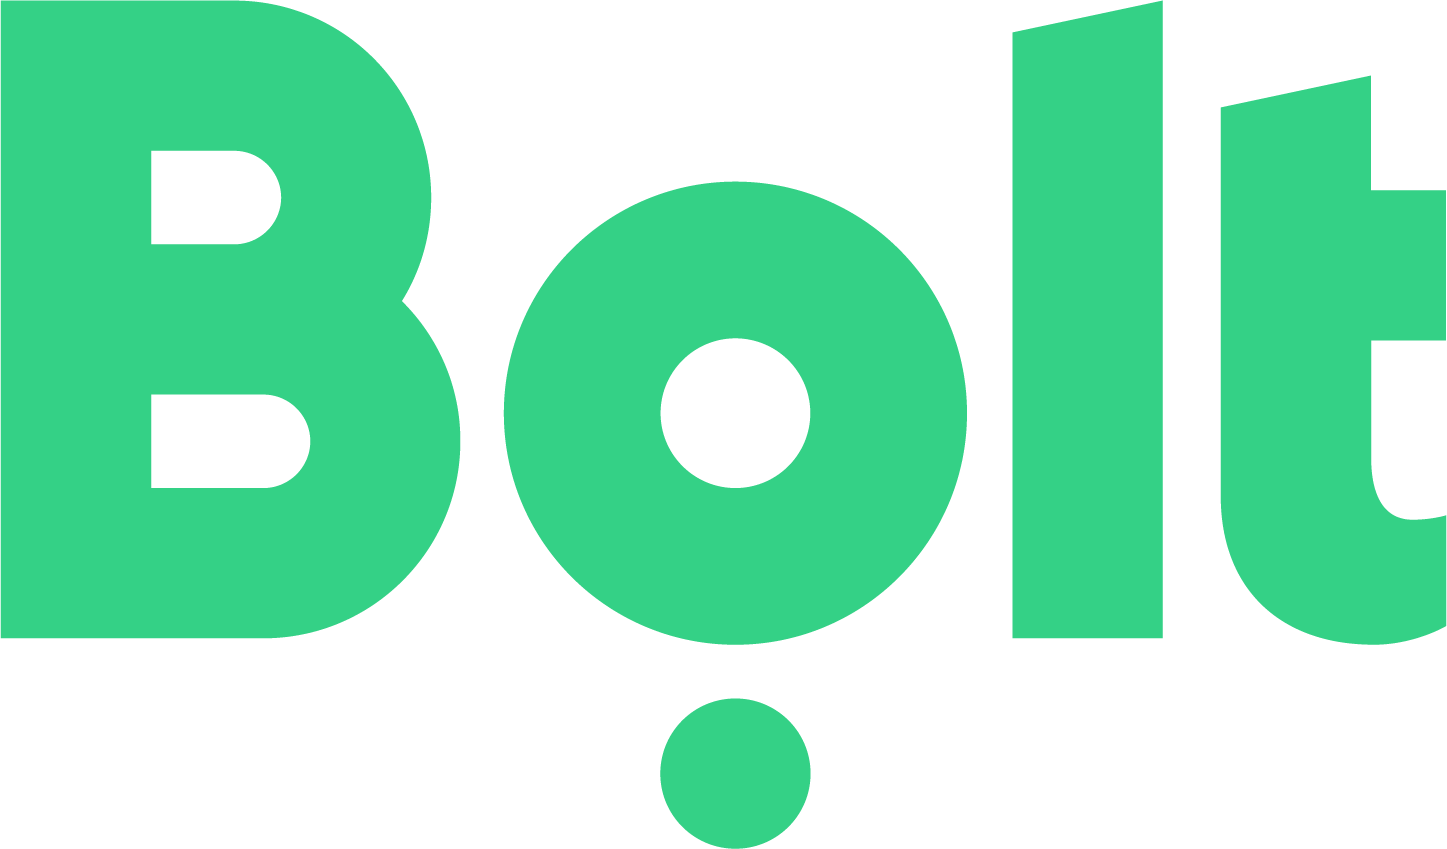 Bolt To Invest Over €500m In Africa Over Next Two Years